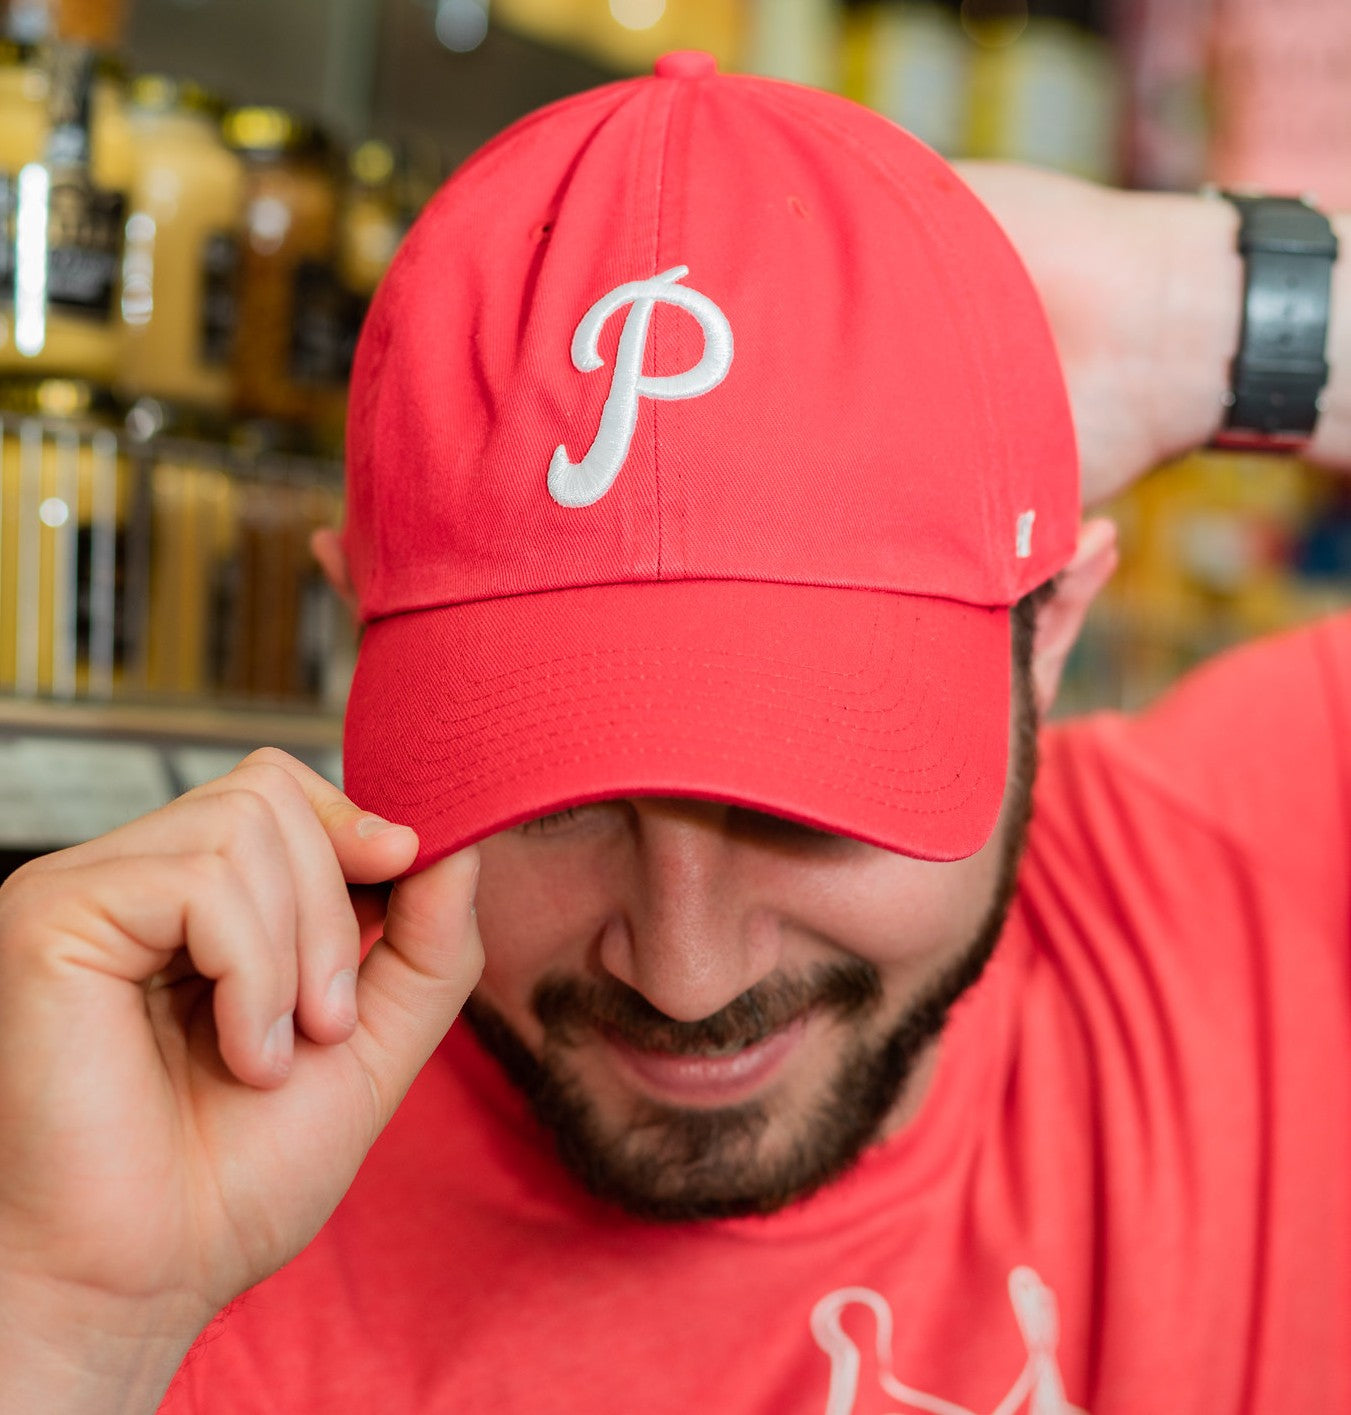 Phillies Gear Hot Seller At Vintage Sports Store In Radnor